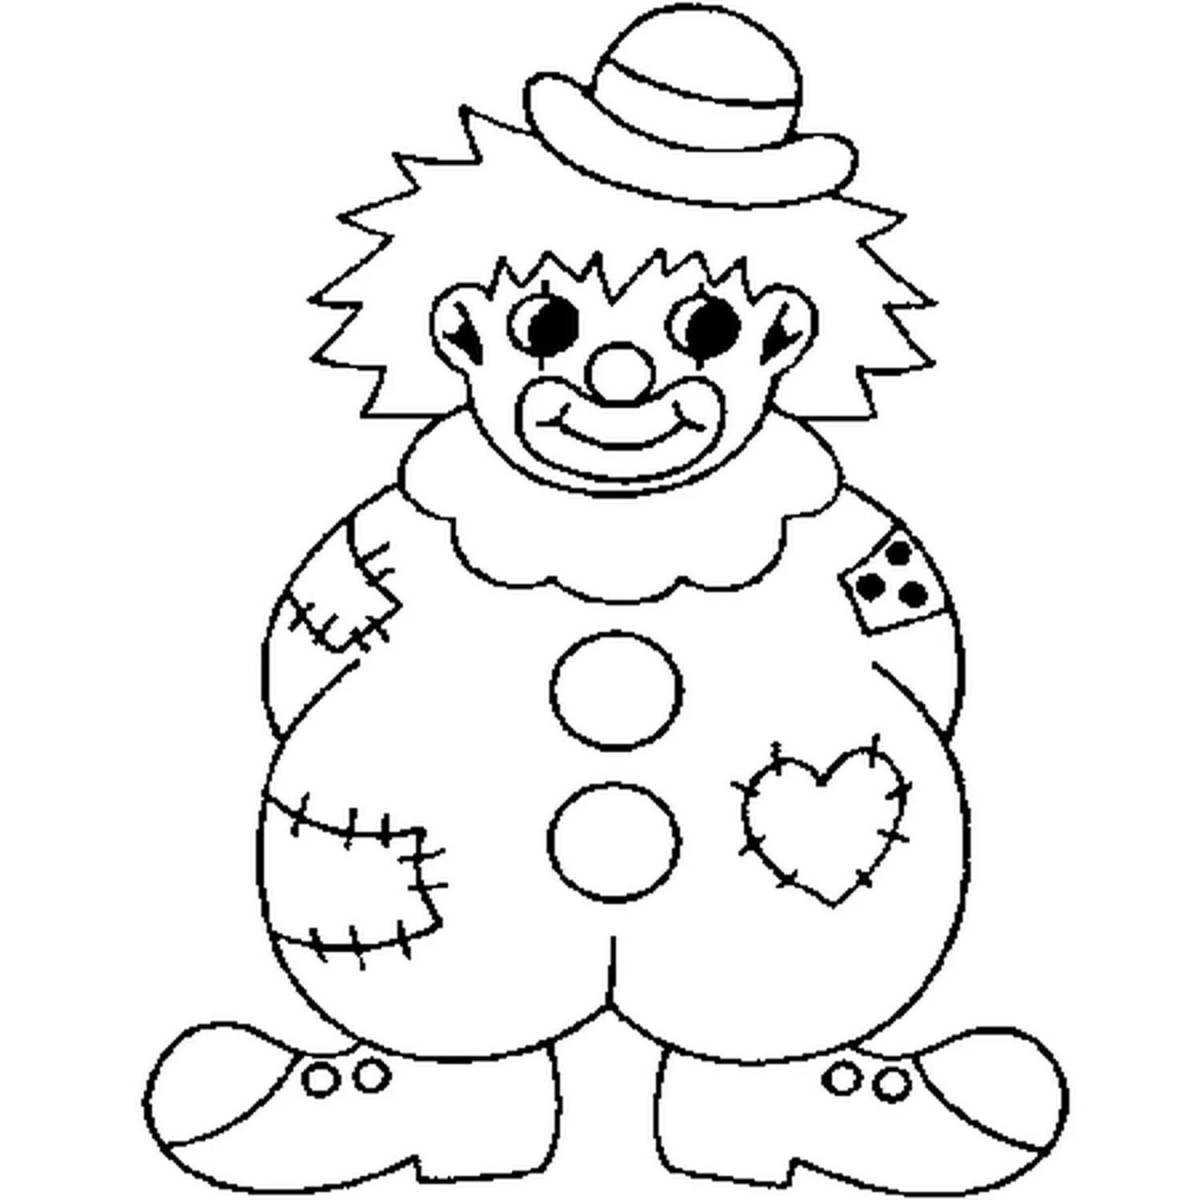 Energetic coloring funny clown for kids